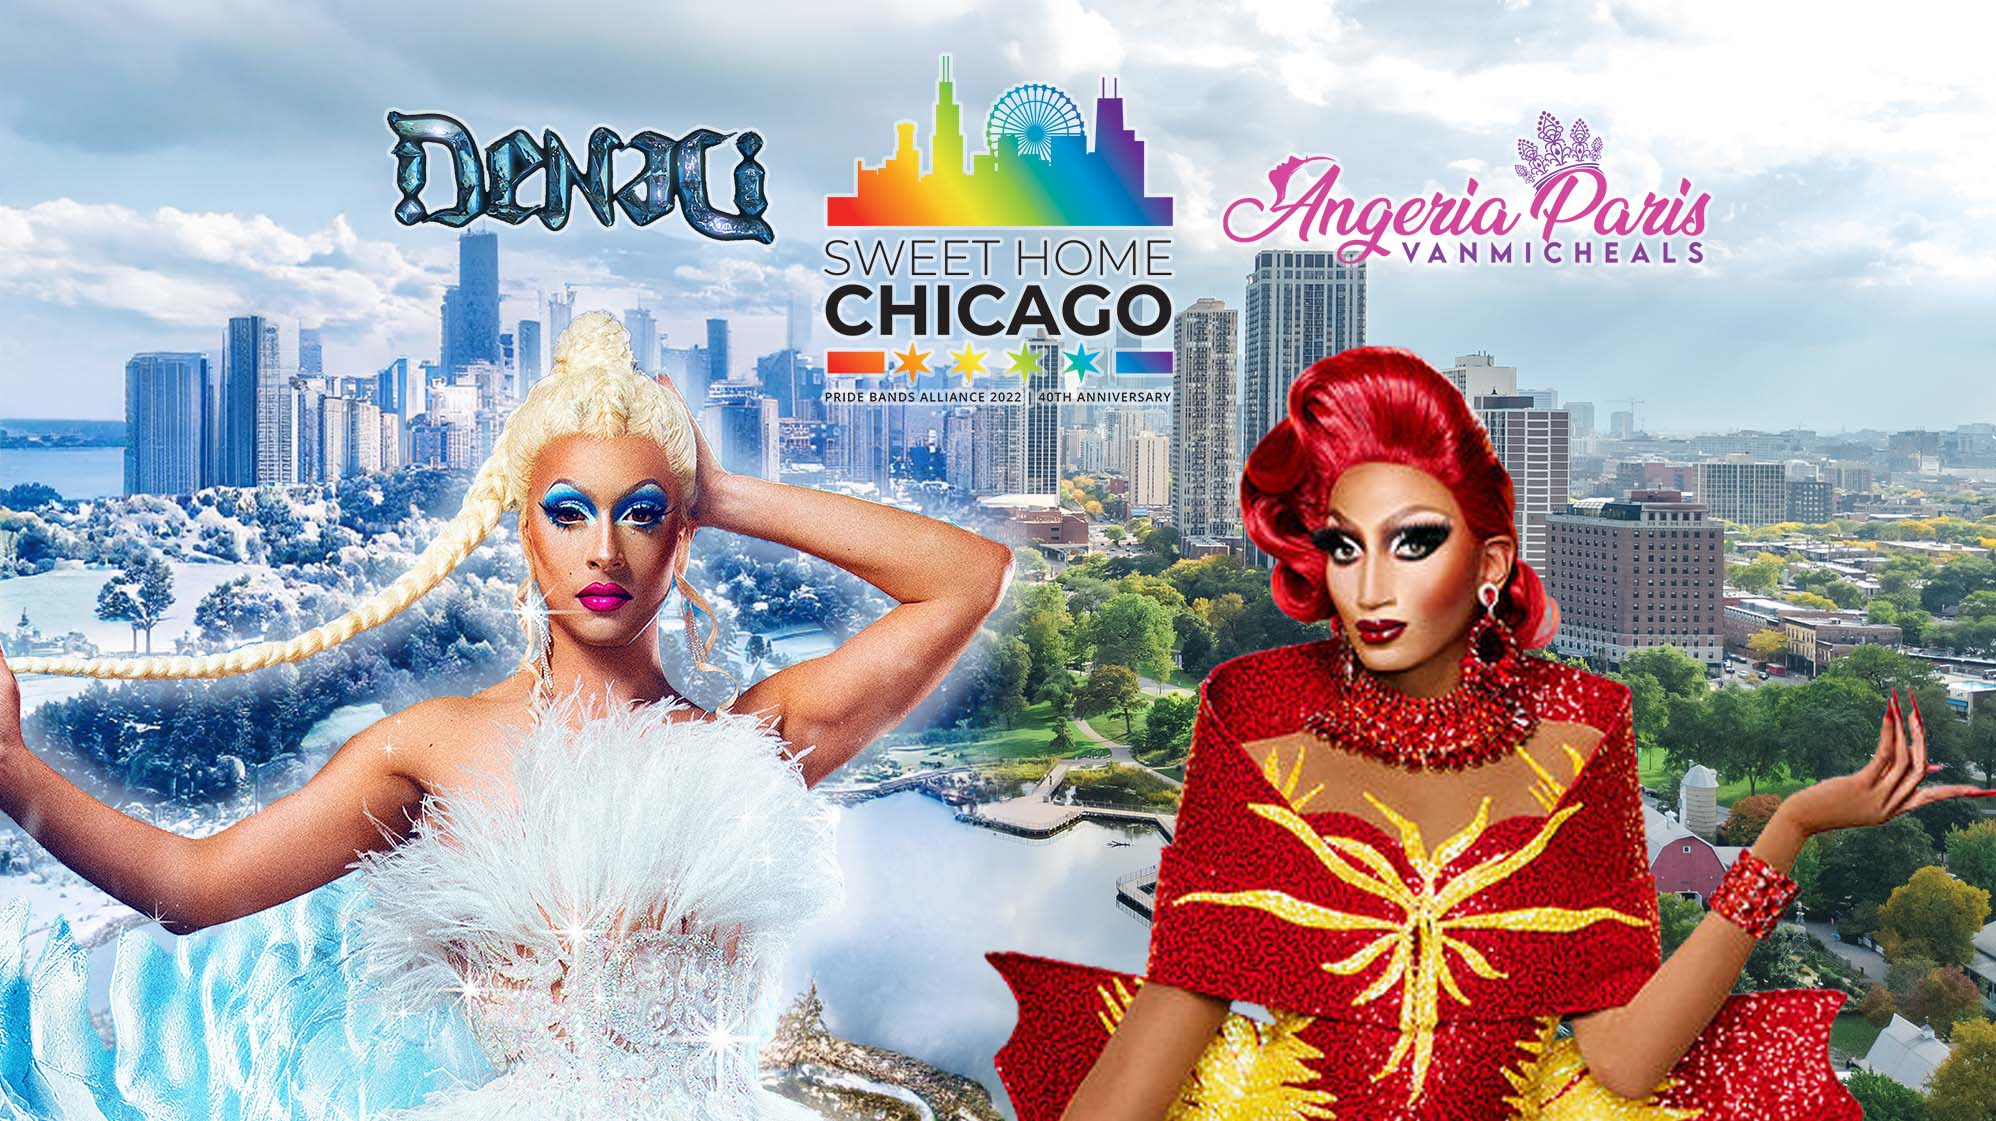 Sweet Home Chicago drag queen graphic